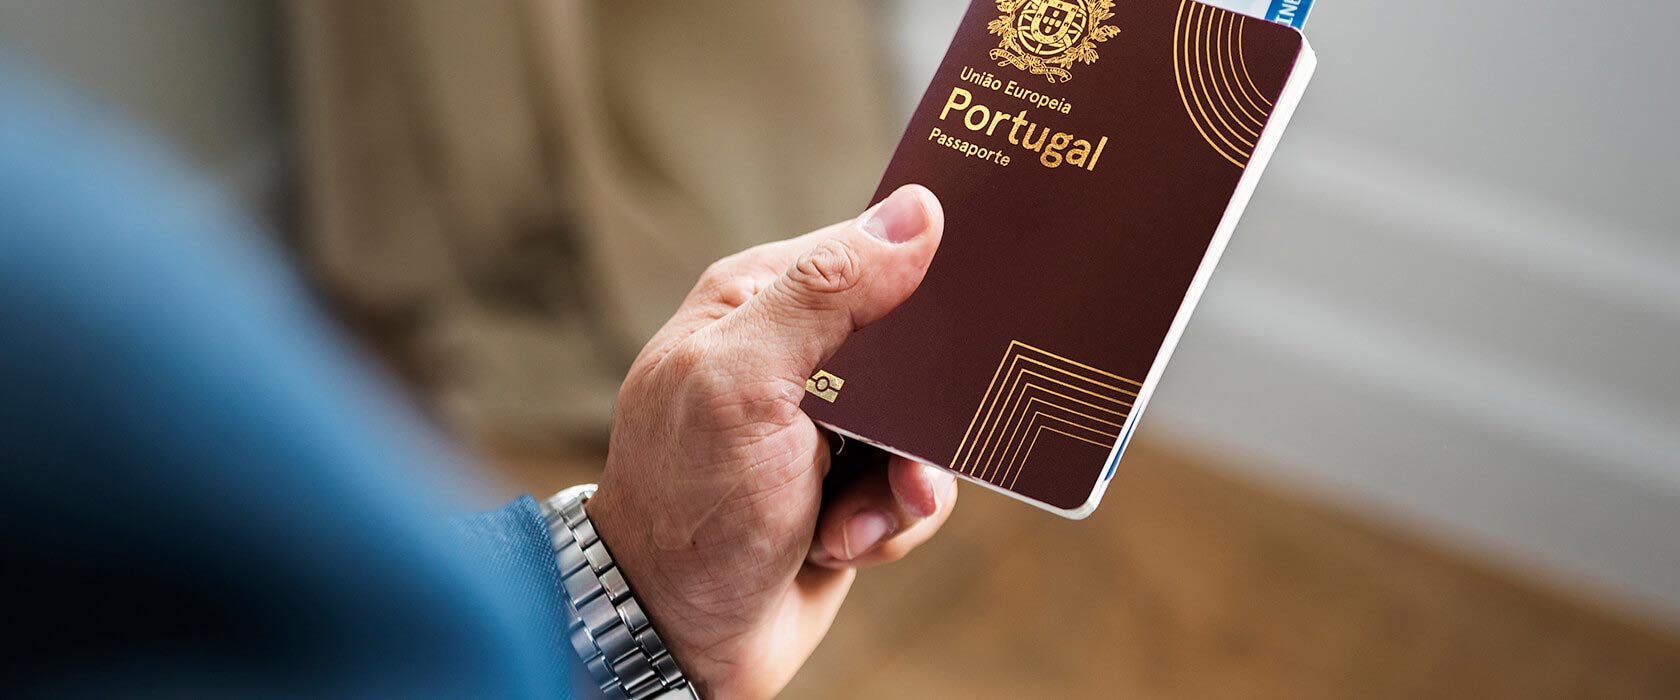 Portugal Golden Visa Announces Lower Entry Investment and Faster Processing to Obtain a Portugal Golden Visa 1